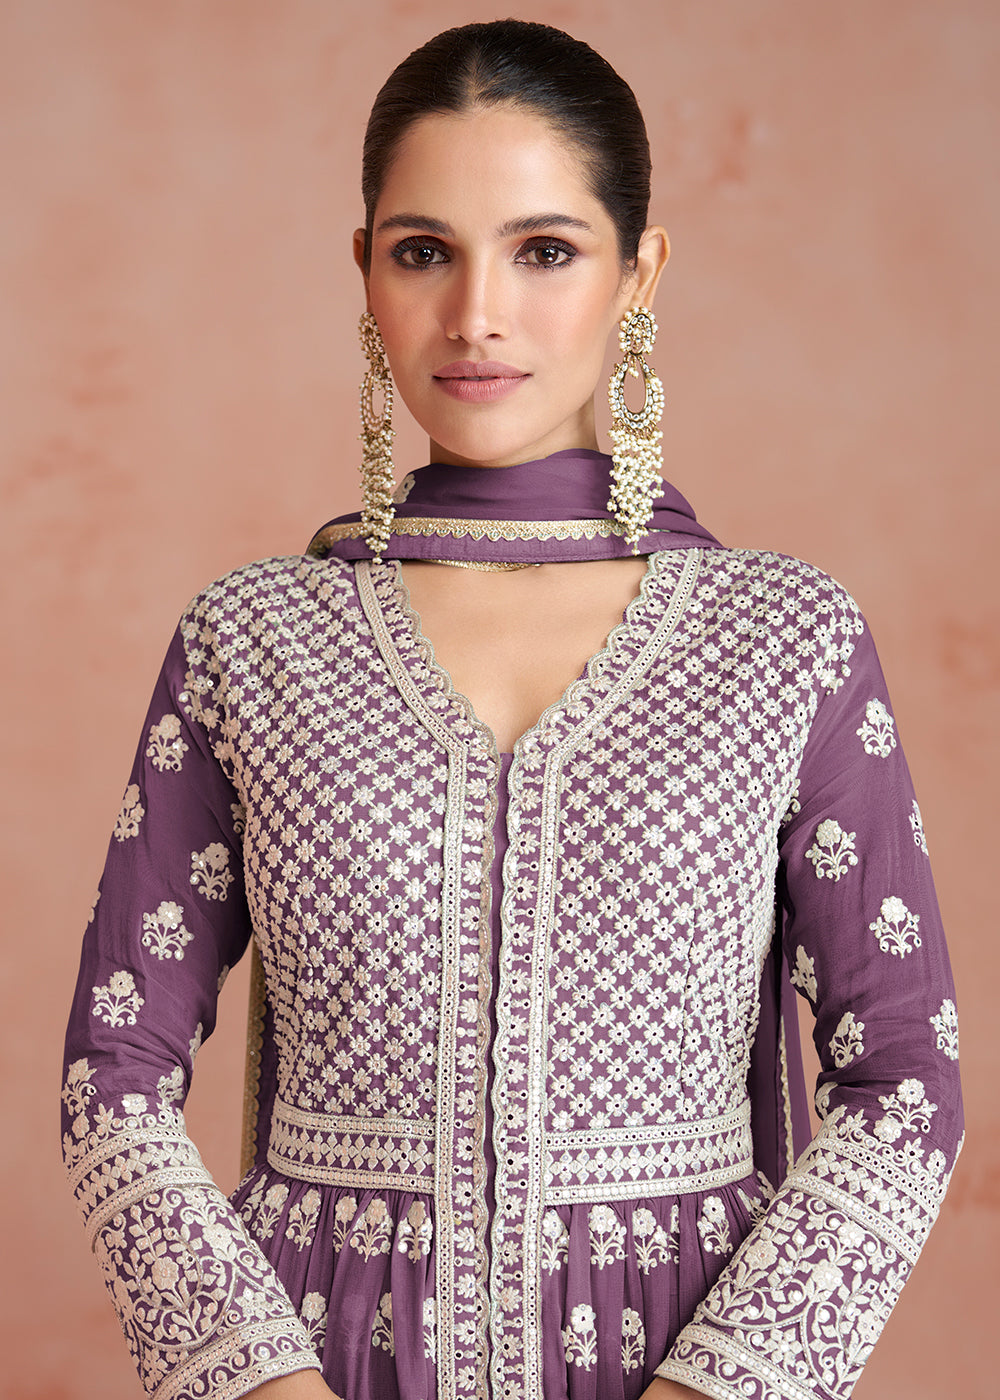 Buy Now Plum Purple Slit Style Embroidered Georgette Skirt Anarkali Suit Online in USA, UK, Australia, New Zealand, Canada, Italy & Worldwide at Empress Clothing.